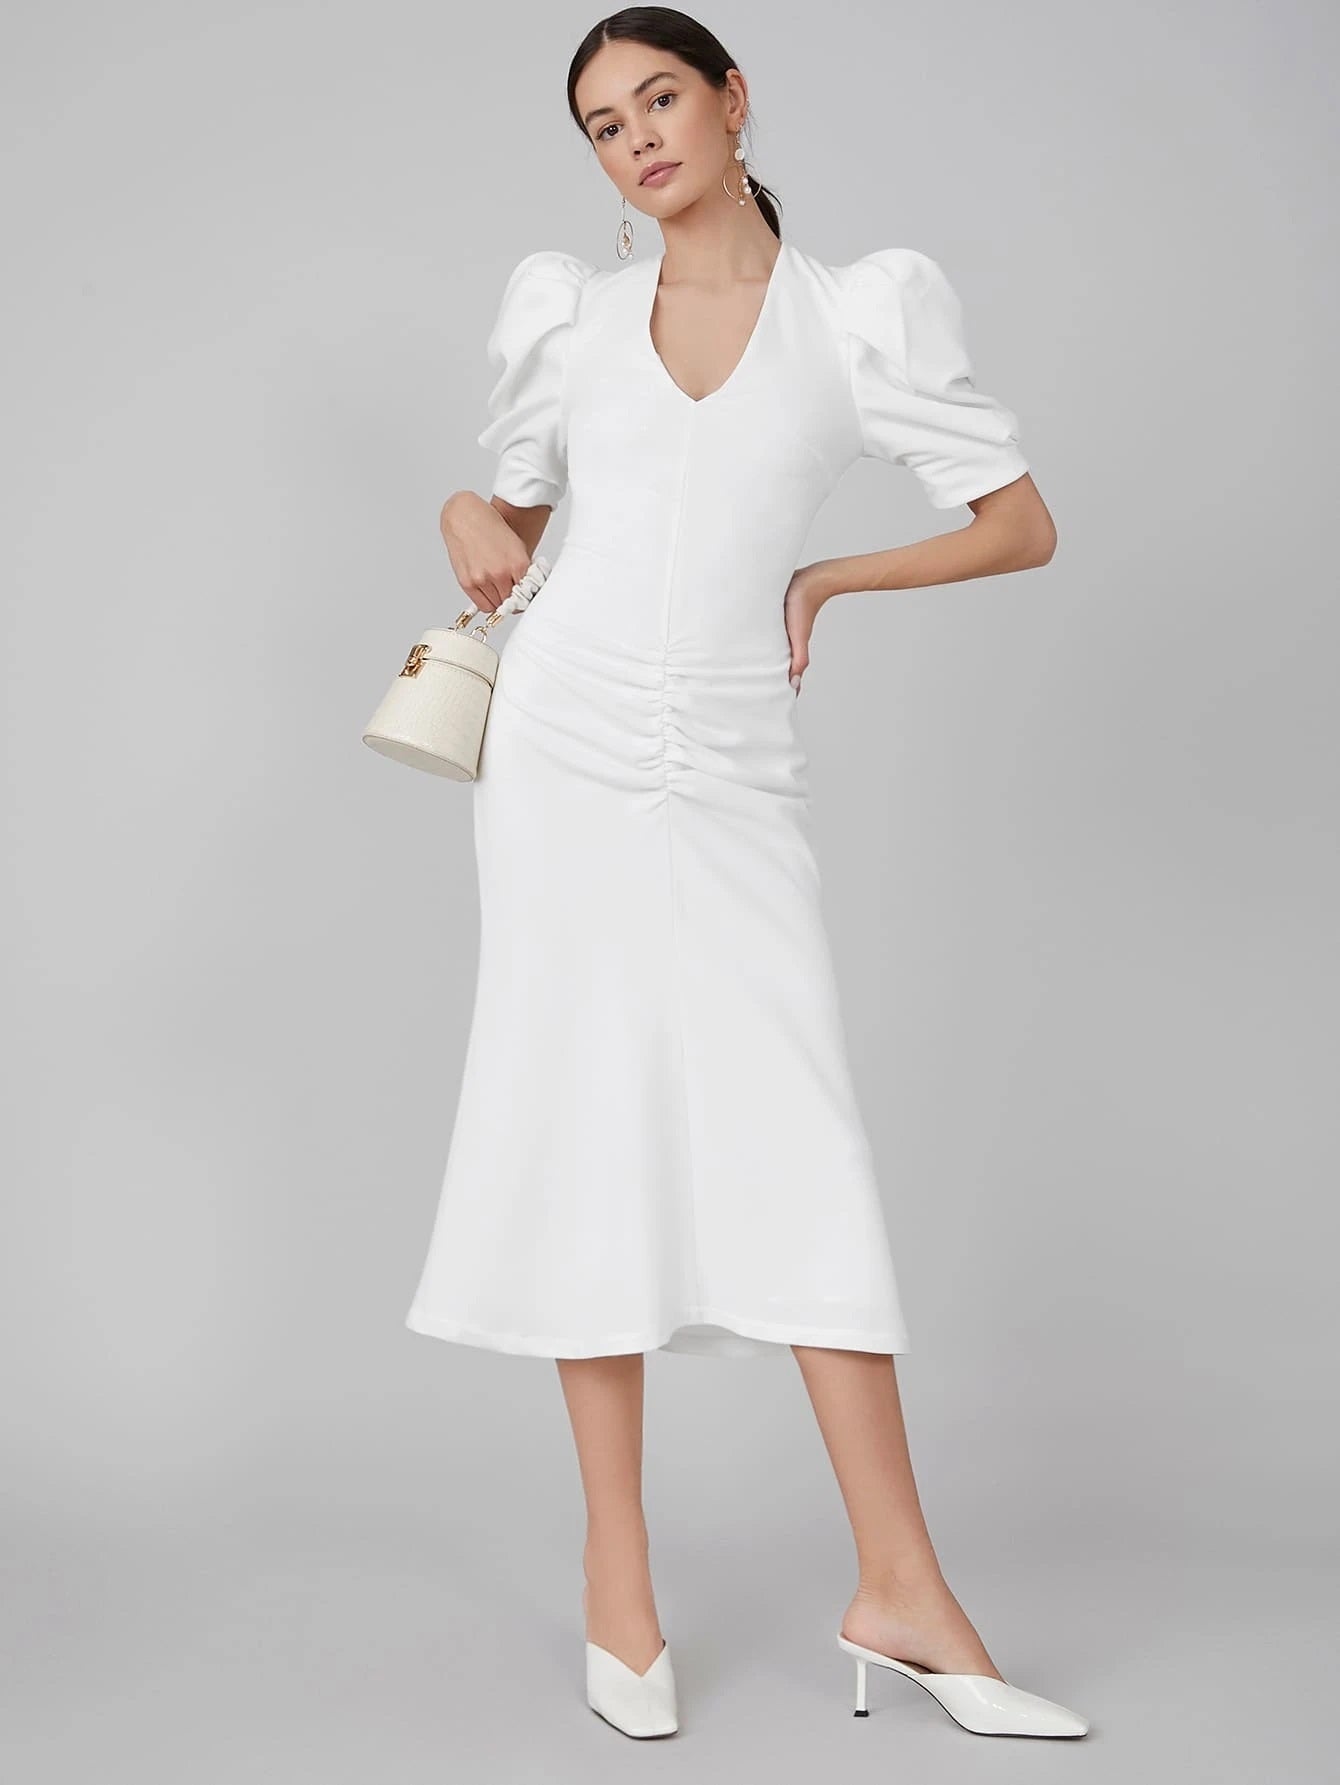 CM-ES119342 Women Elegant Seoul Style V-Neck Puff Sleeve Ruched Fitted Dress - White